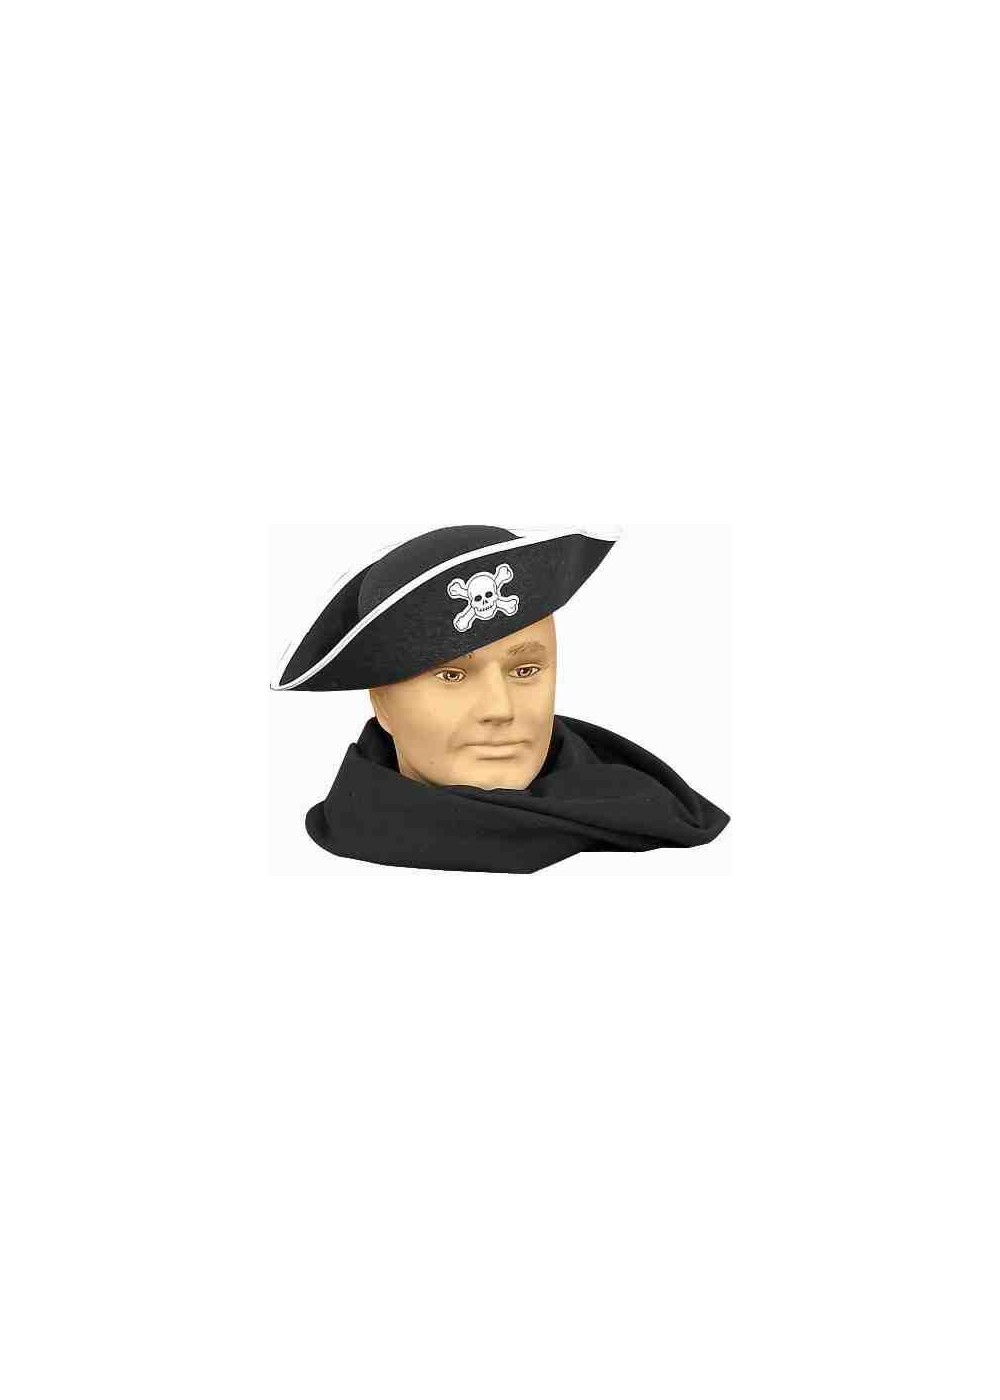 Adult Pirate Hat 108